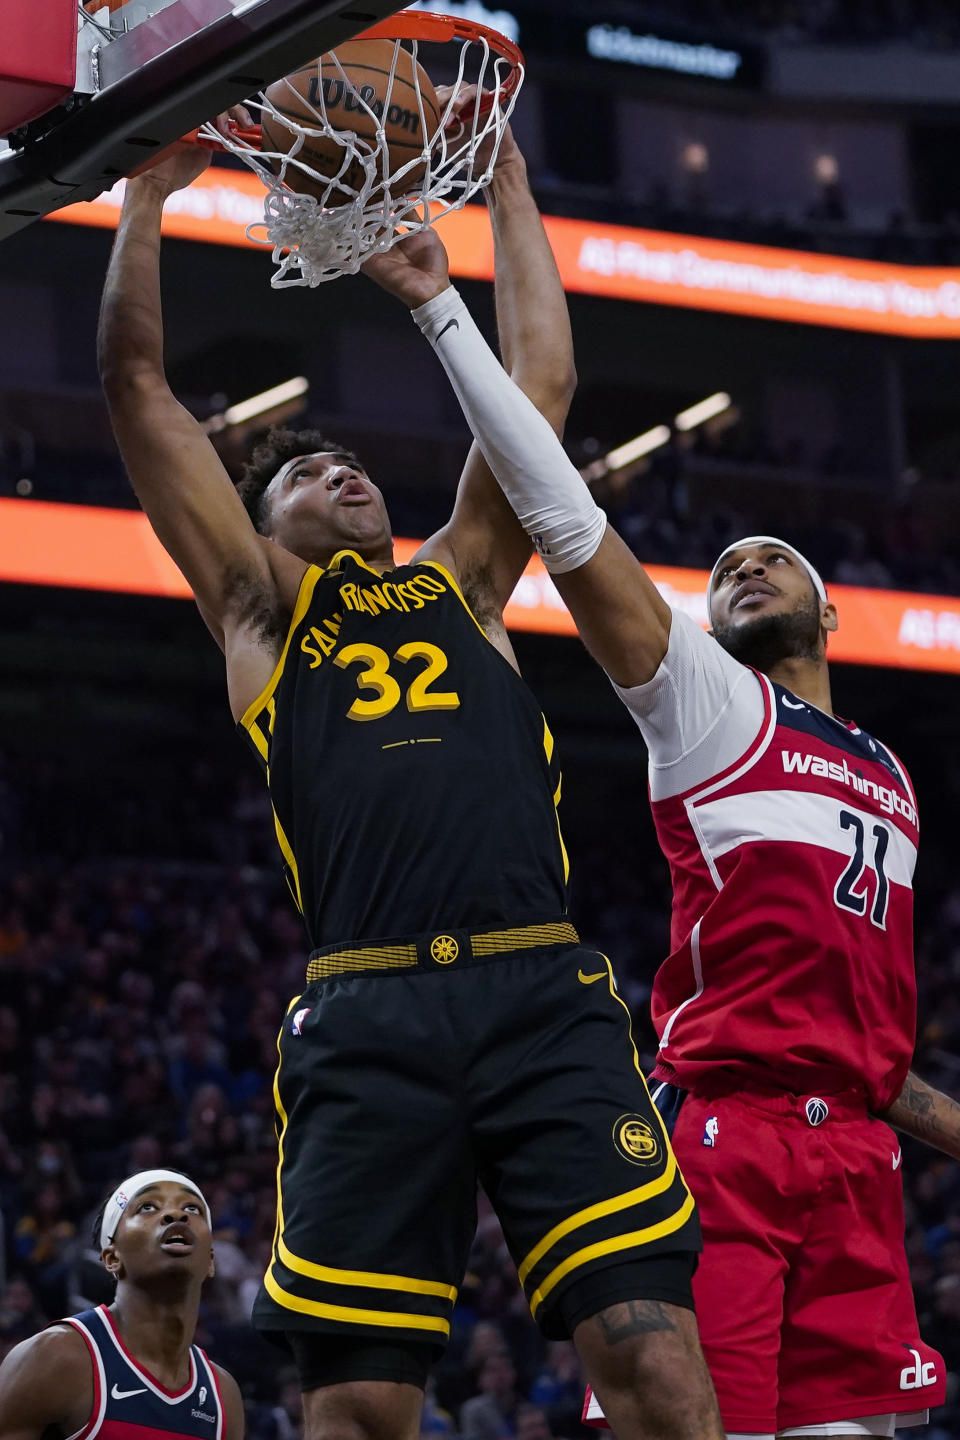 Golden State Warriors forward Trayce Jackson-Davis, left, dunks while defended by Washington Wizards center Daniel Gafford during the first half of an NBA basketball game Friday, Dec. 22, 2023, in San Francisco. (AP Photo/Godofredo A. Vásquez)